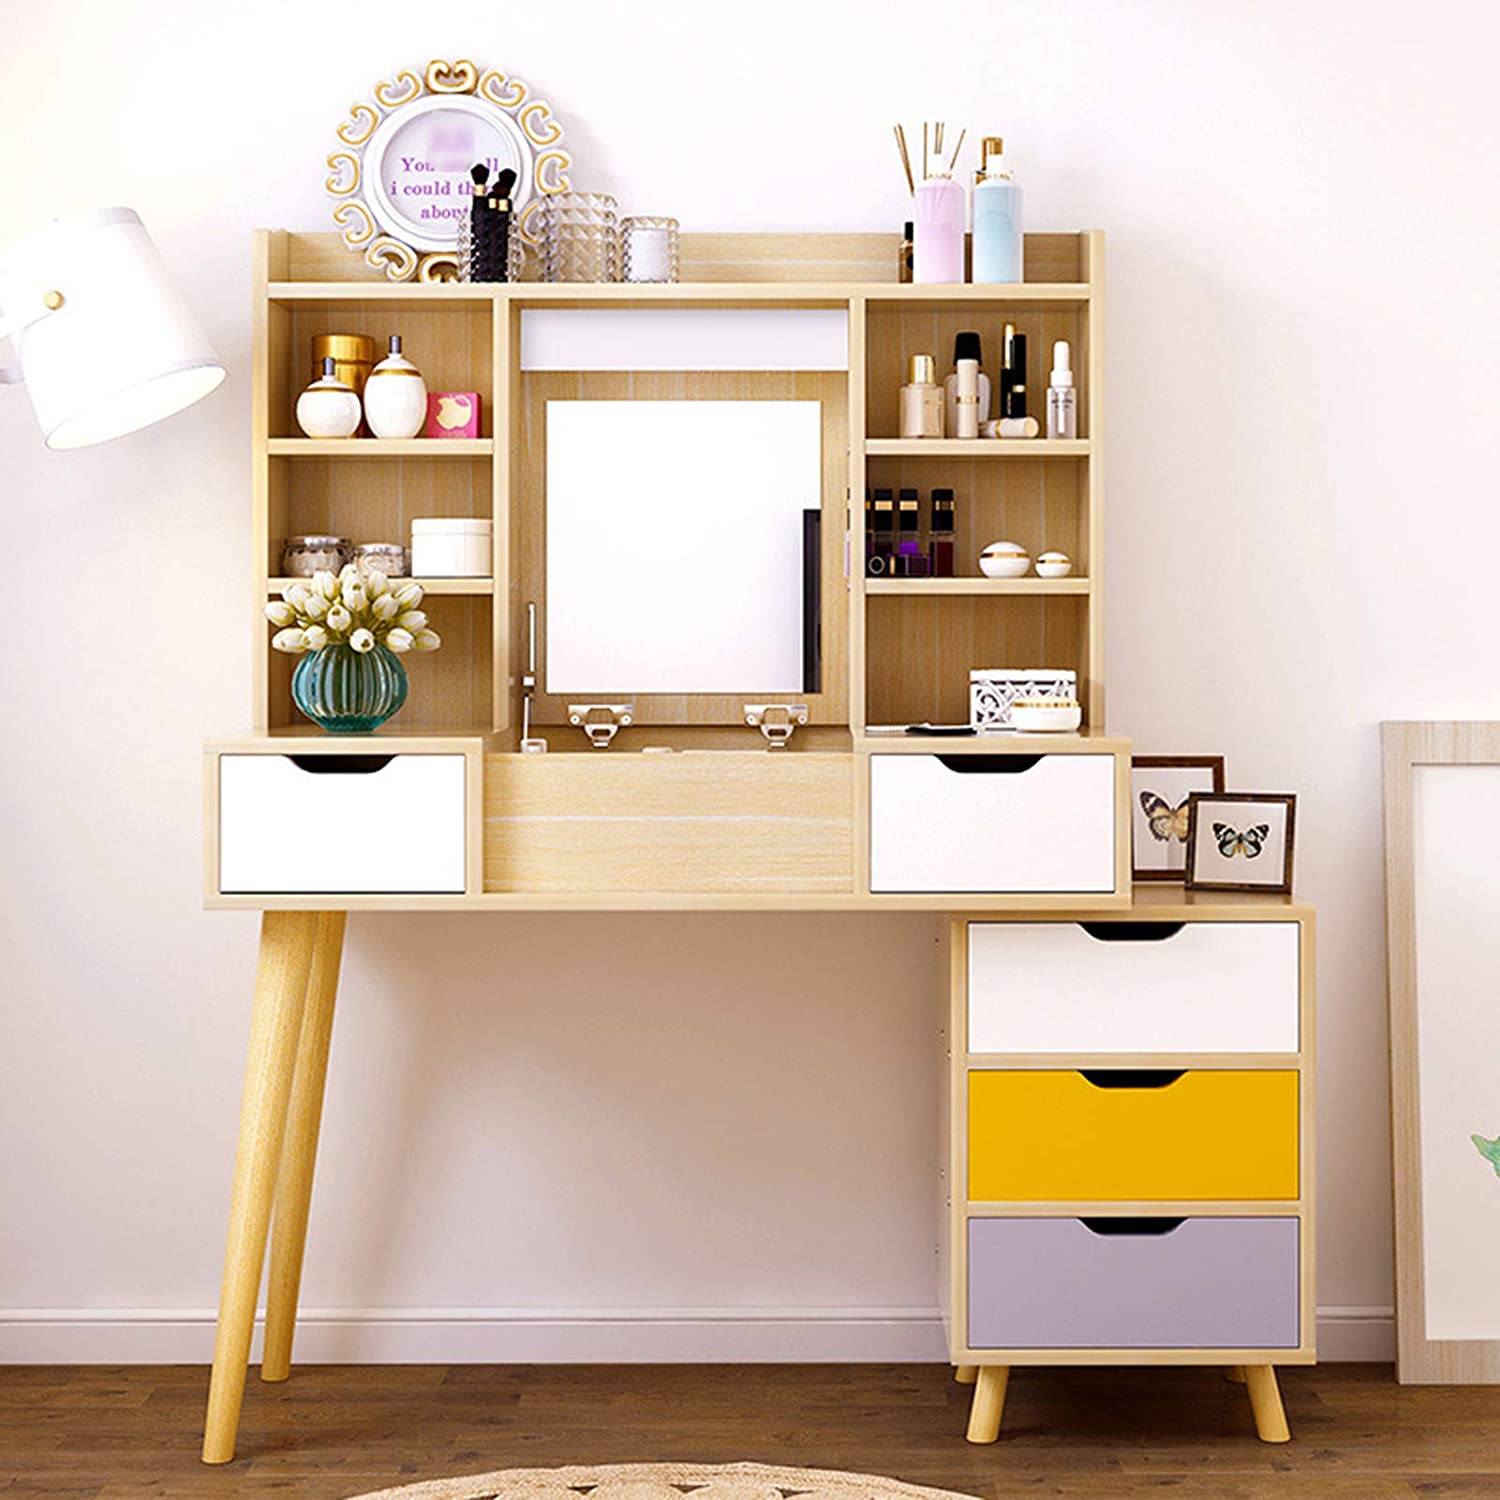 Dressing table , vanity table with storage shelves